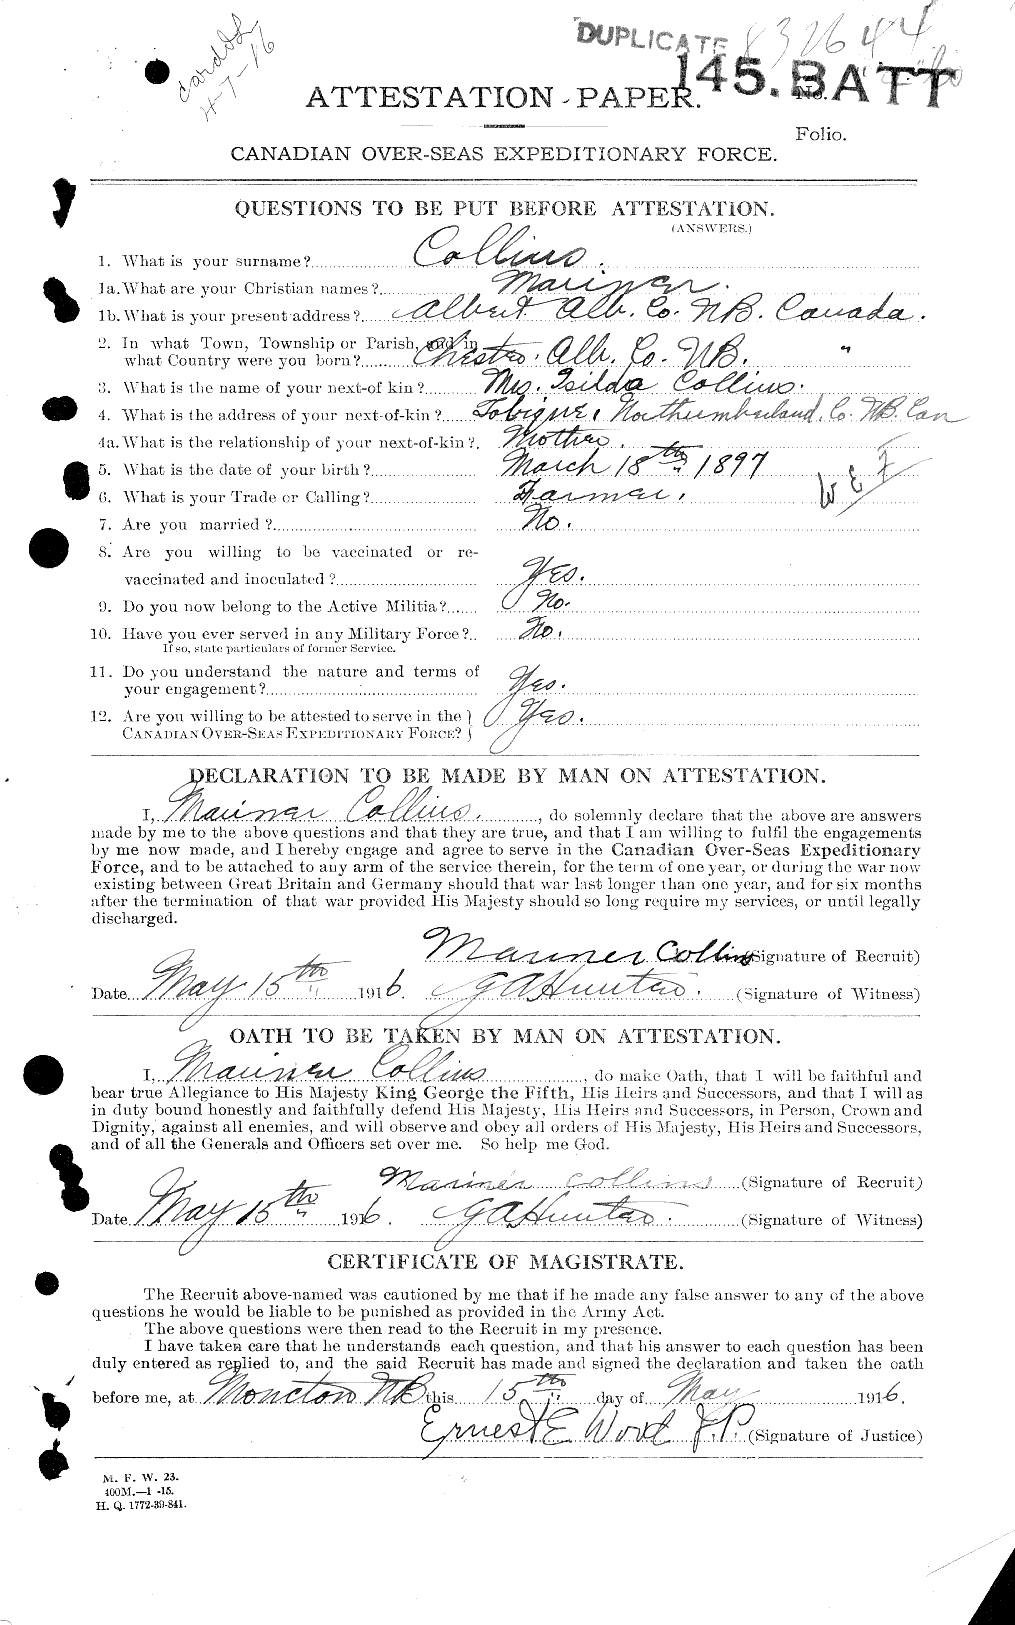 Personnel Records of the First World War - CEF 034456a